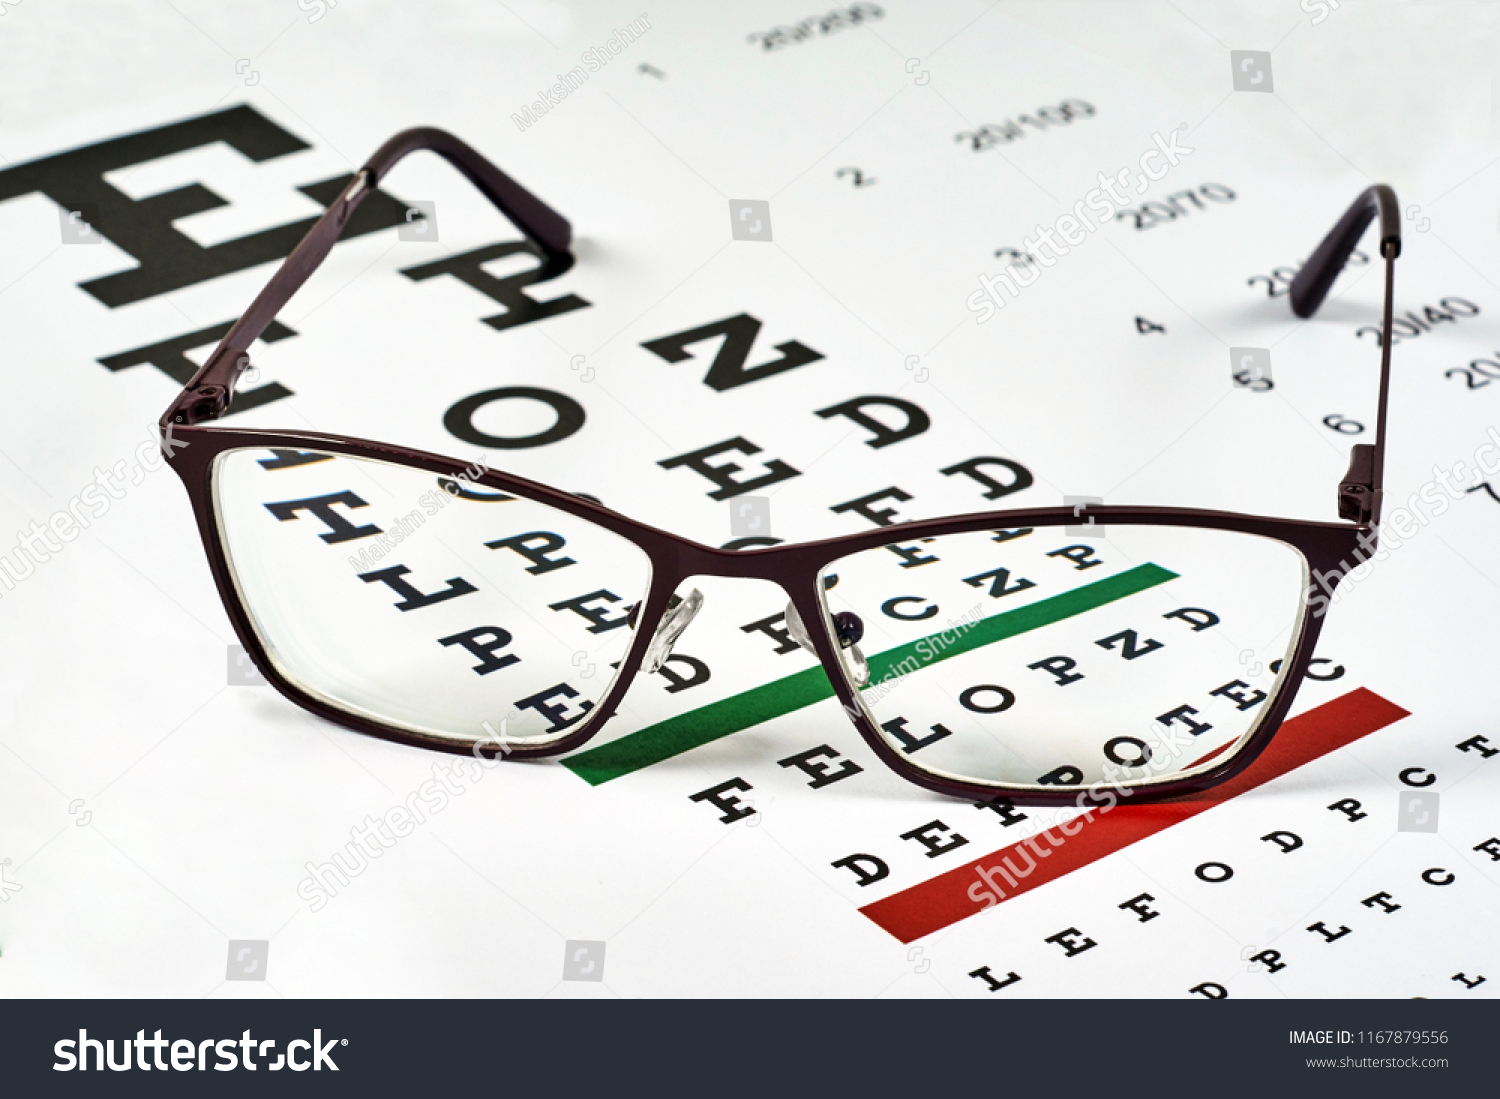 corrective glasses on the background of the Snellen chart #1167879556